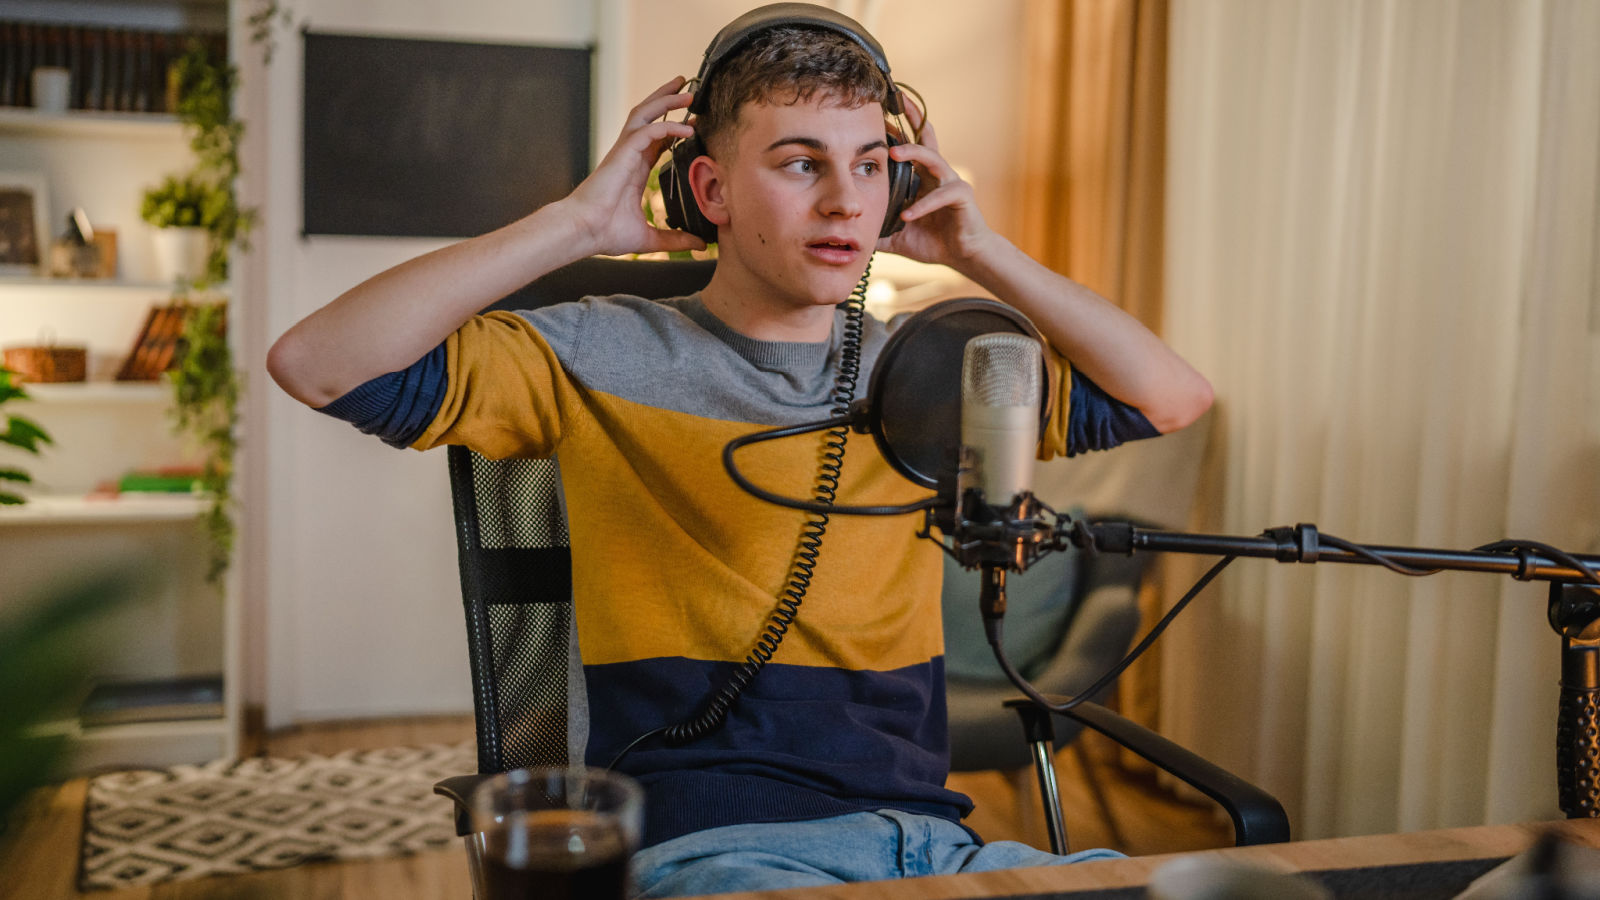 image credit: miljan-zivkovic/shutterstock <p>Voice-over work for commercials, audiobooks, and animation can be done from a home studio. It’s a field that values unique voices and acting skills. Talented artists can earn high pay for their vocal work. “I never knew my voice could be my most valuable asset,” one artist remarks.</p>